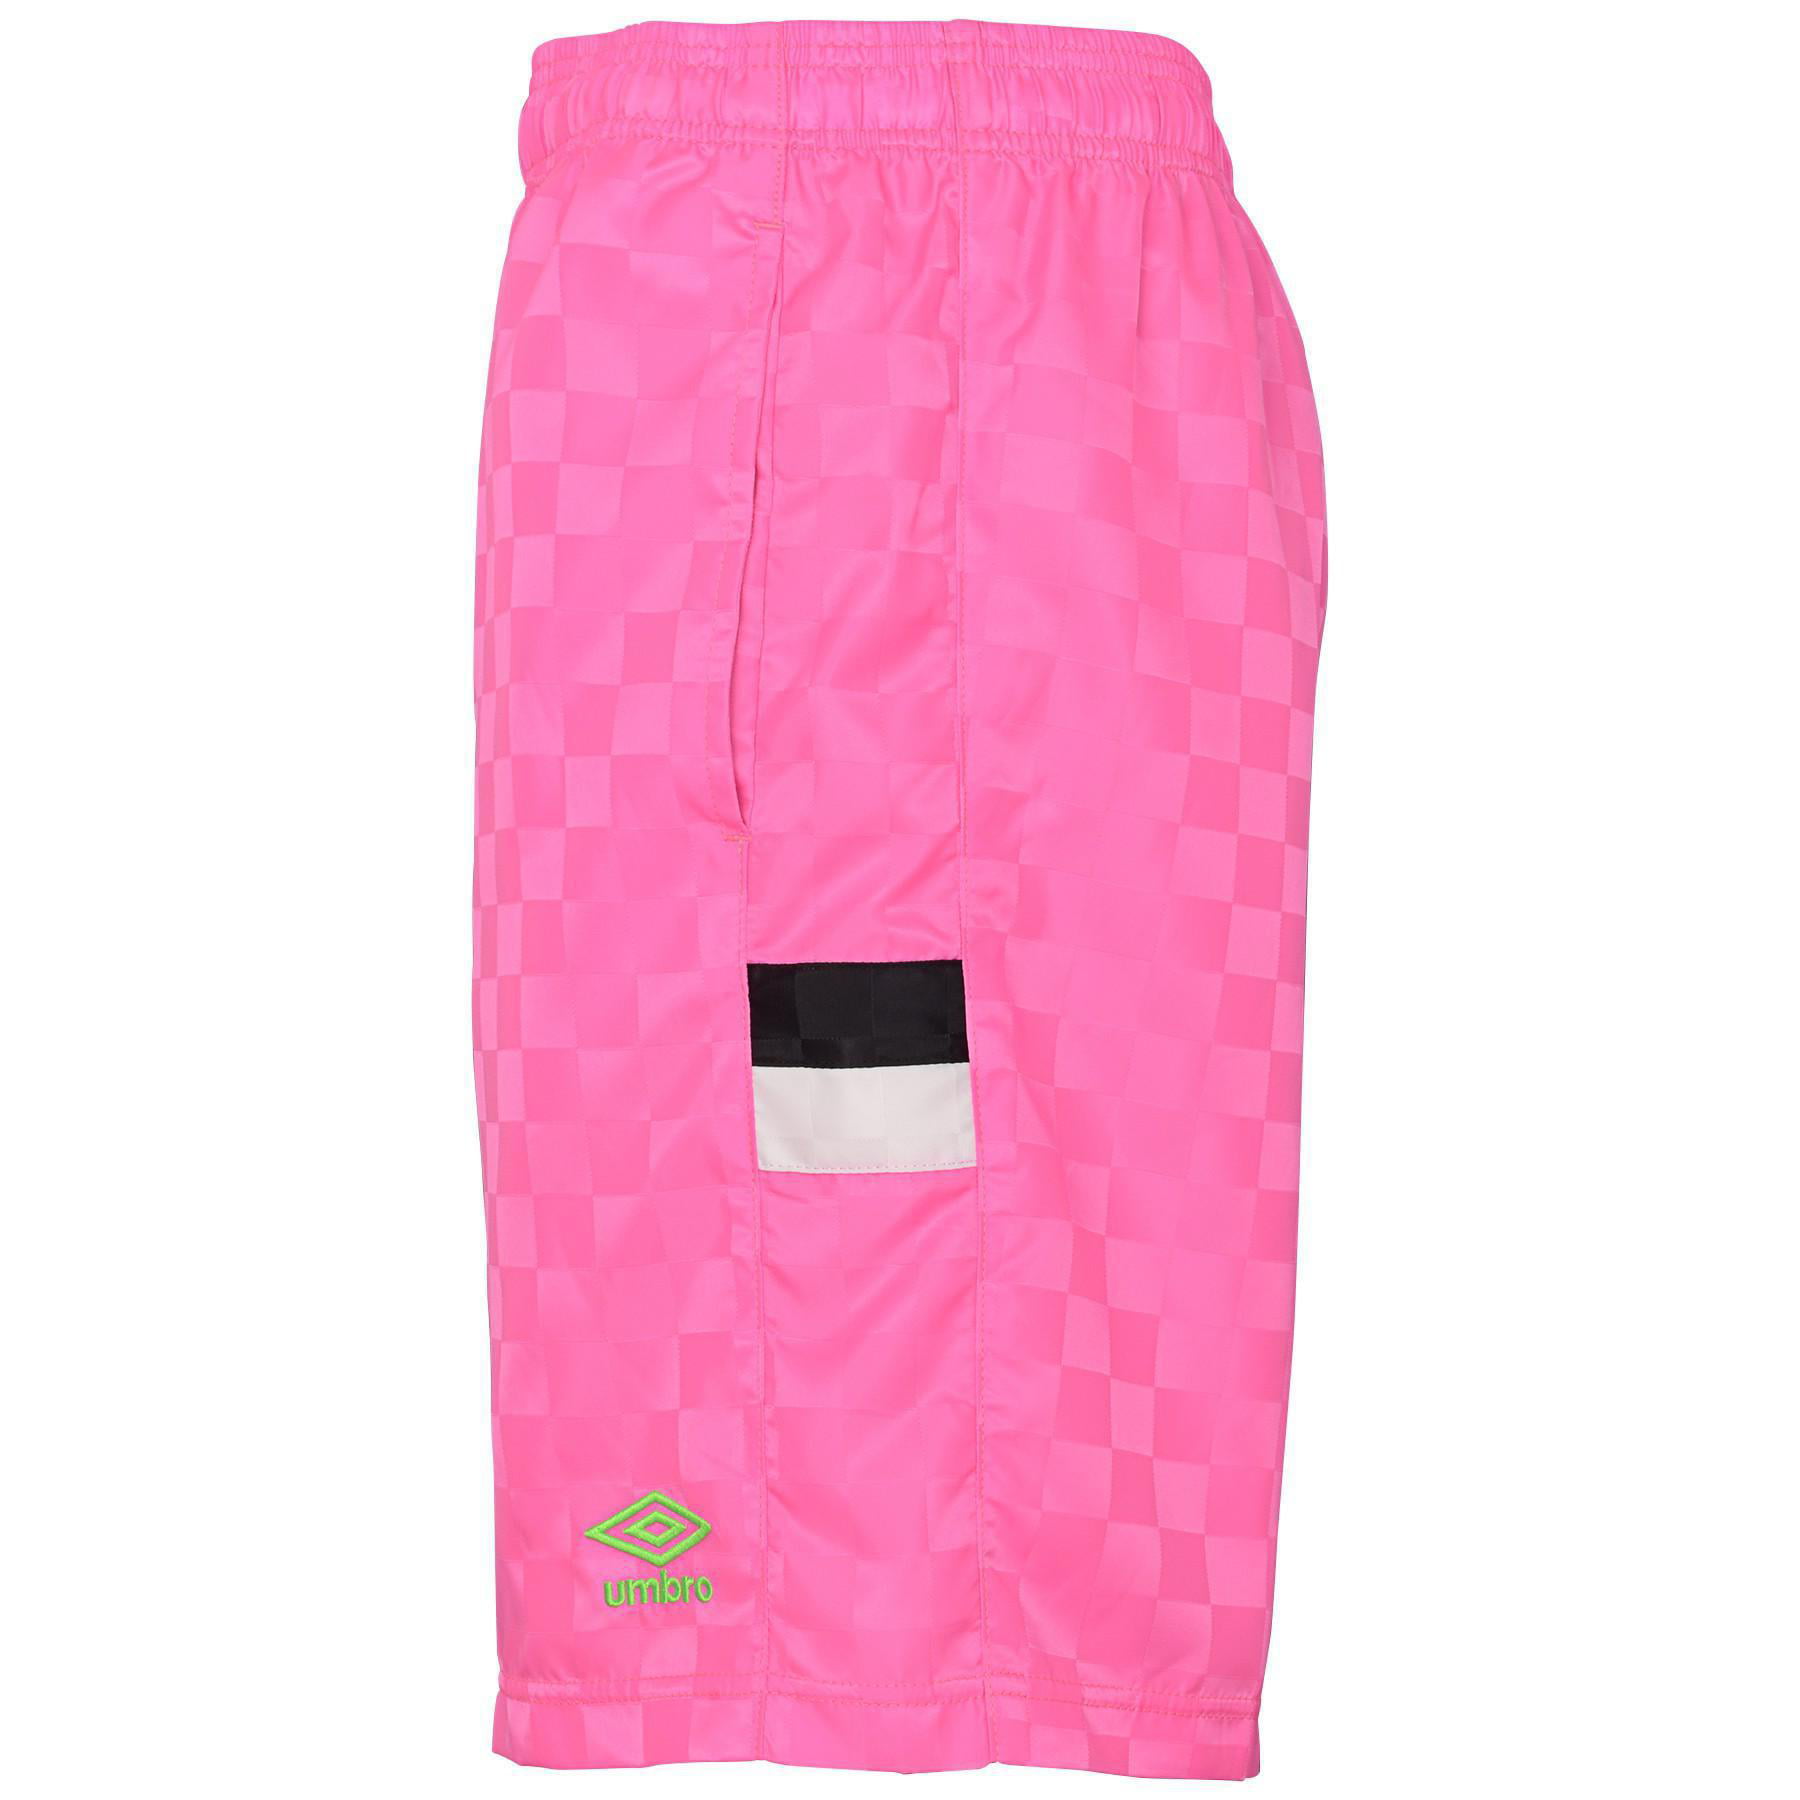 Umbro Soccer Shorts Pink Size XL NEW! 18-20 